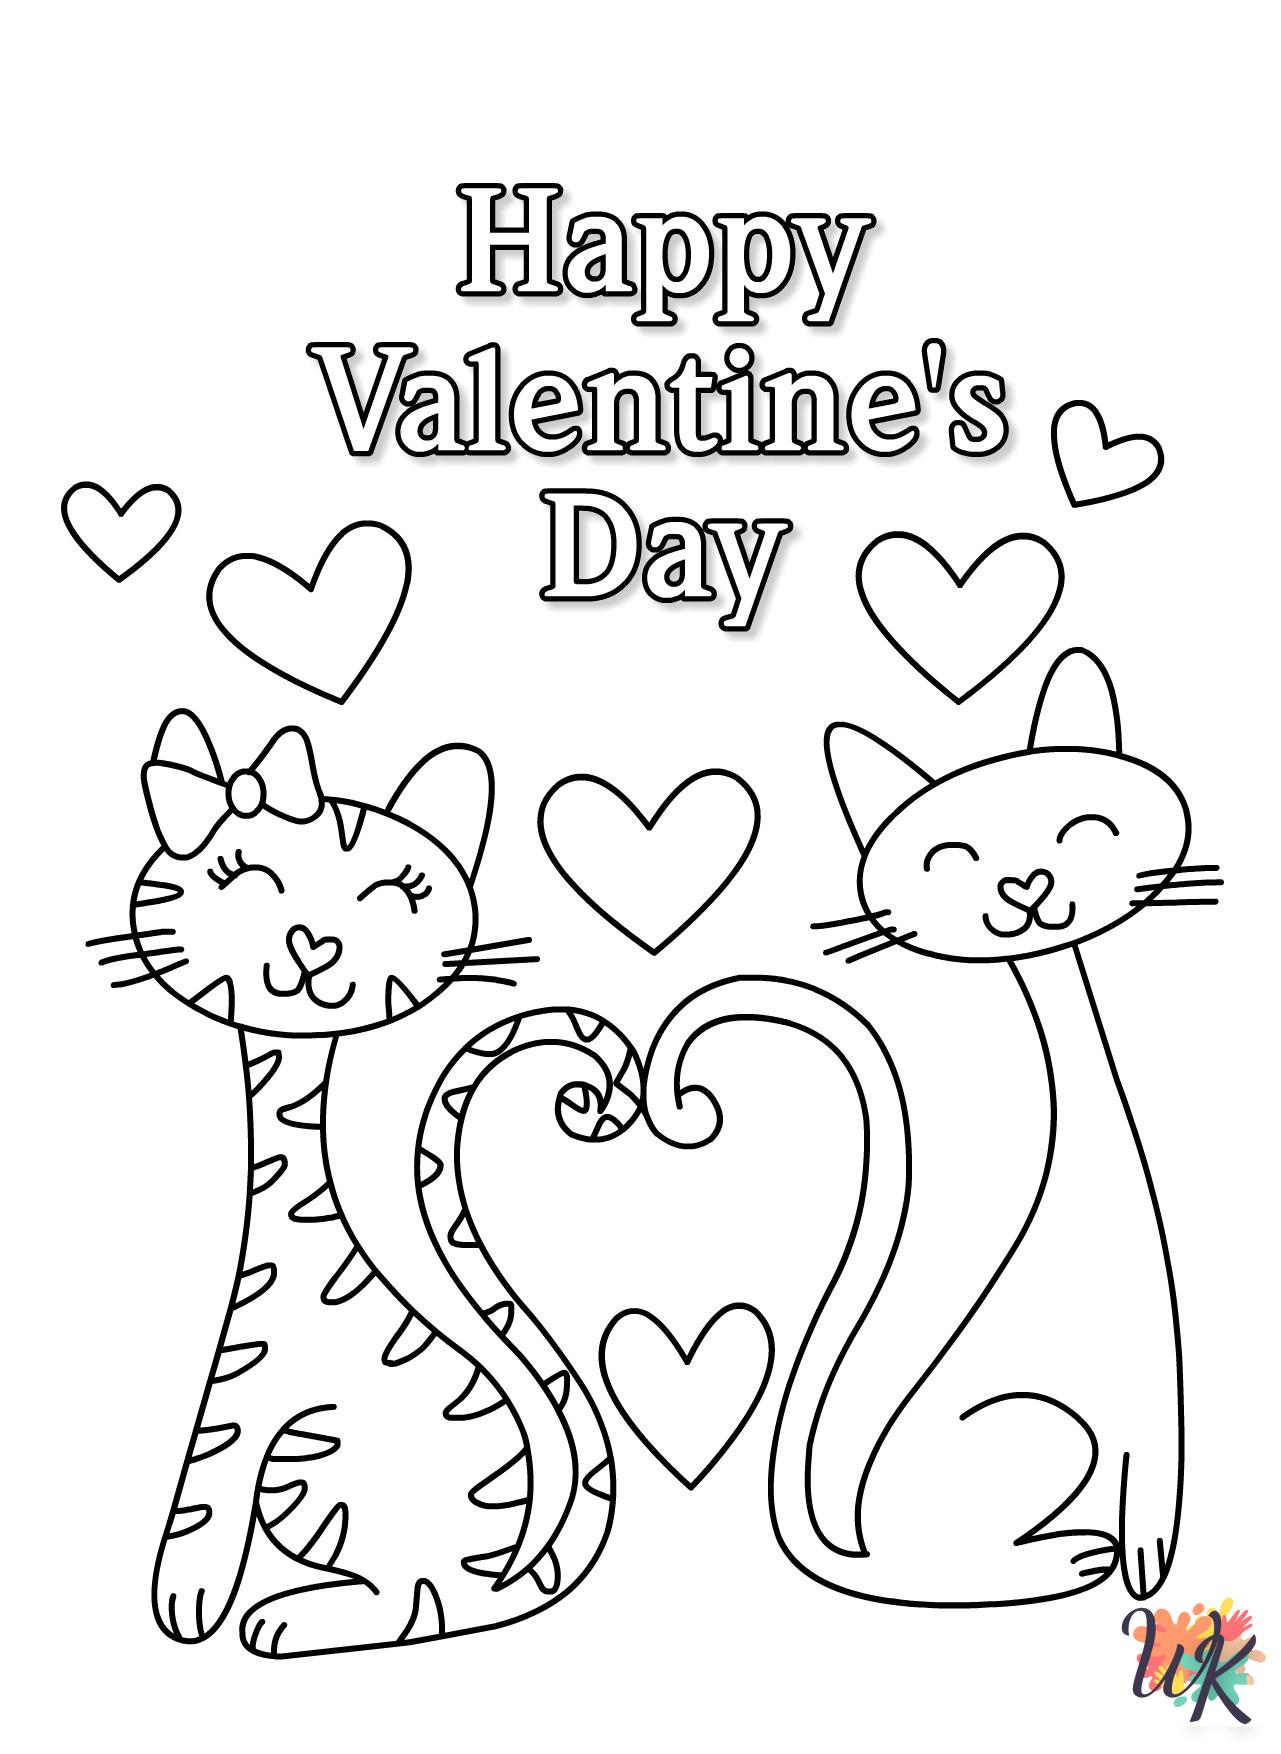 fun Valentine's Day coloring pages